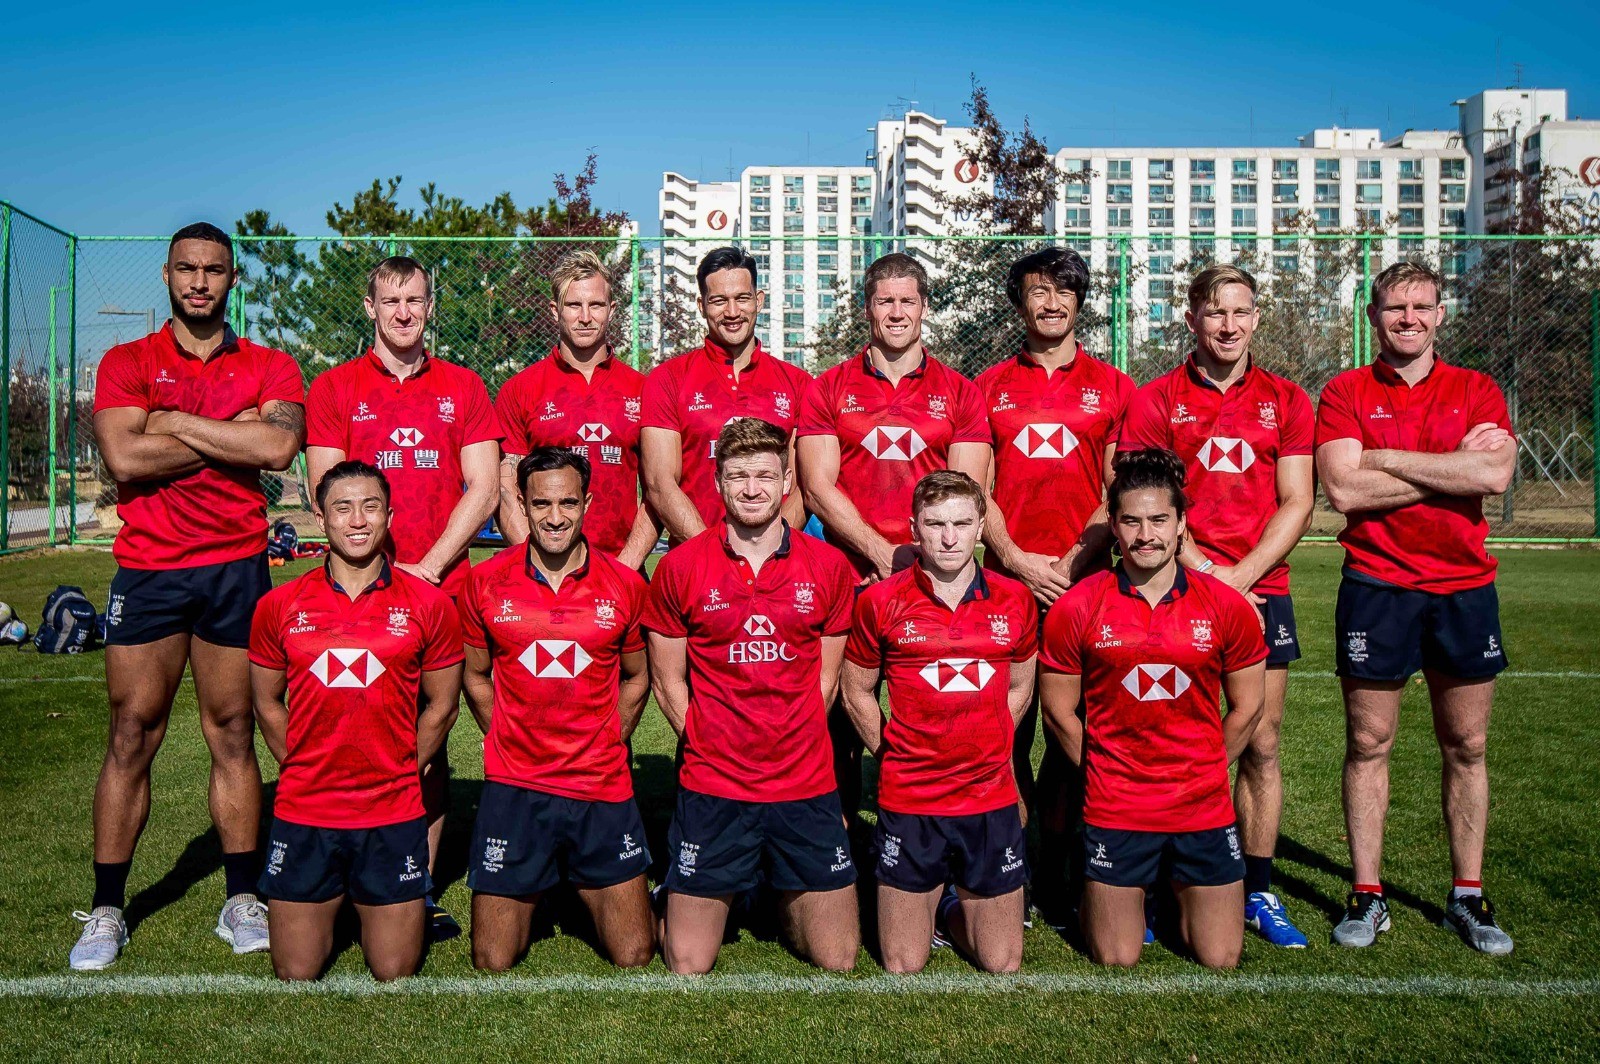 The 13 players who could lead Hong Kong to Olympic glory. From left in back: Max Denmark, Alex McQueen, Max Woodward, Michael Coverdale, Lee Jones, Salom Yui Kam-shing, Tom McQueen, Jamie Hood. In front from left: Cado Lee Ka-to, Ben Rimene, Liam Herbert, Hugo Stiles and Russell Webb.